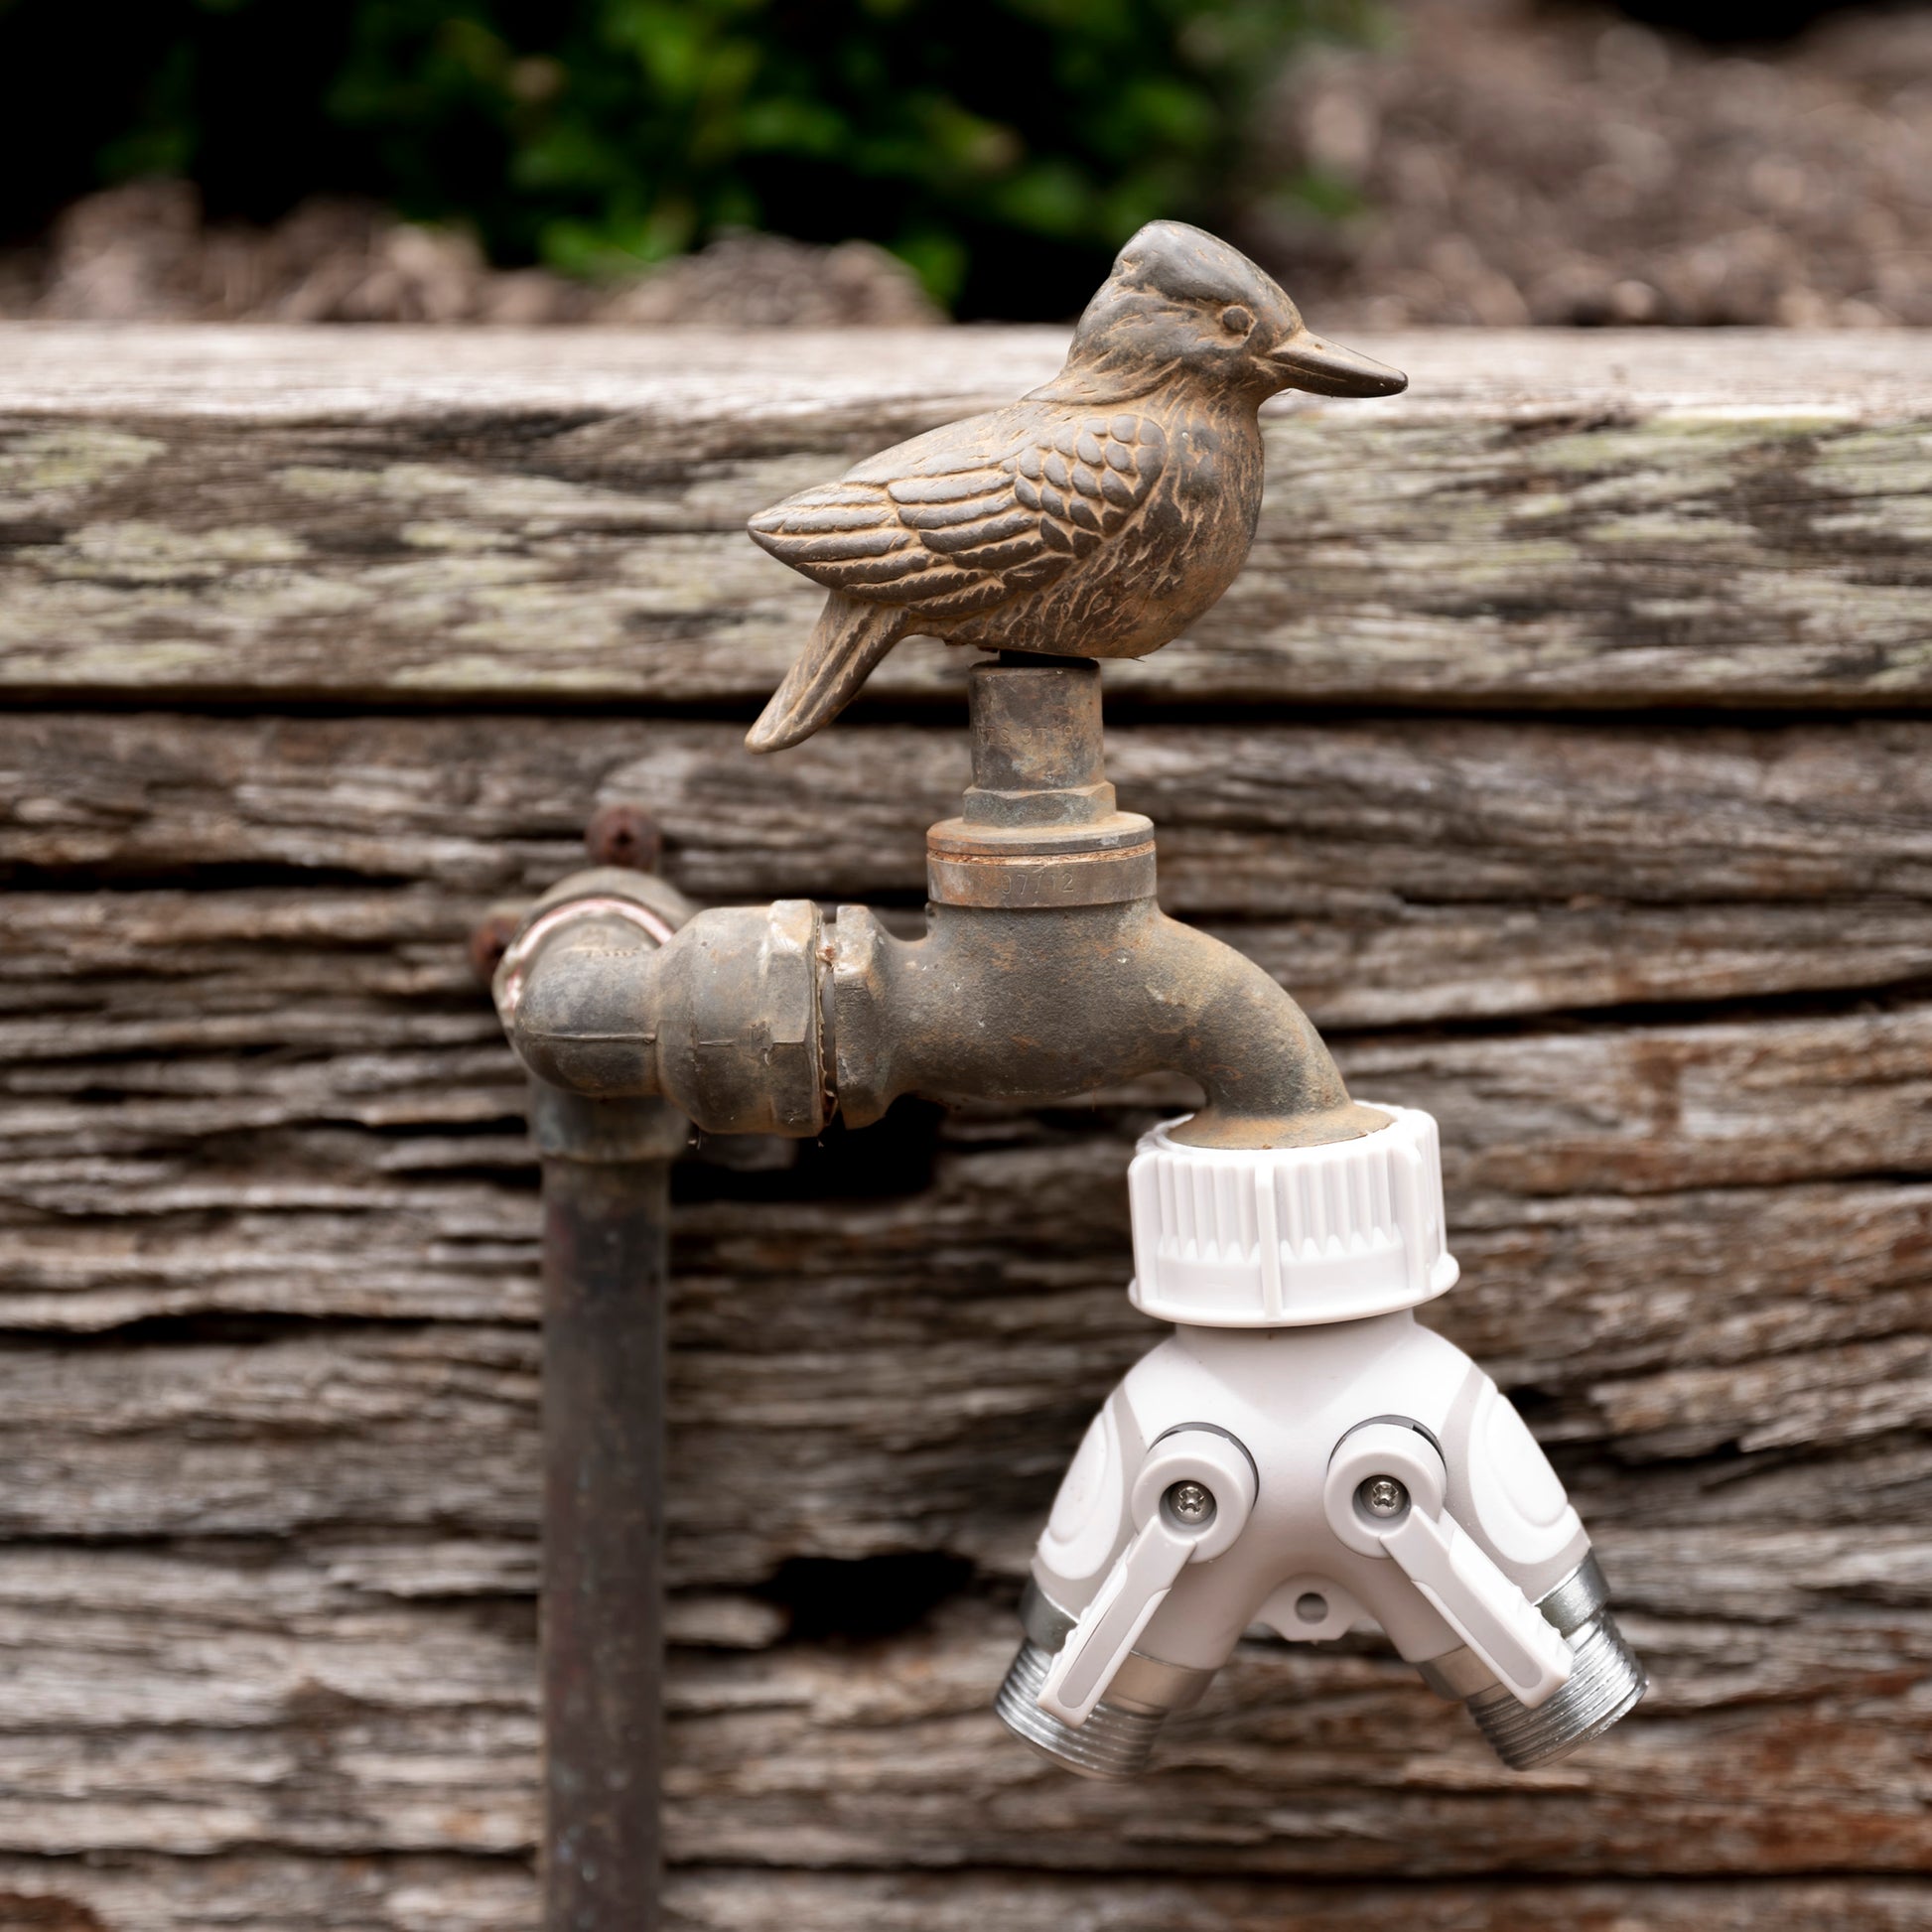 Easy Turn 2-Way Tap Adapter on faucet with bird handle